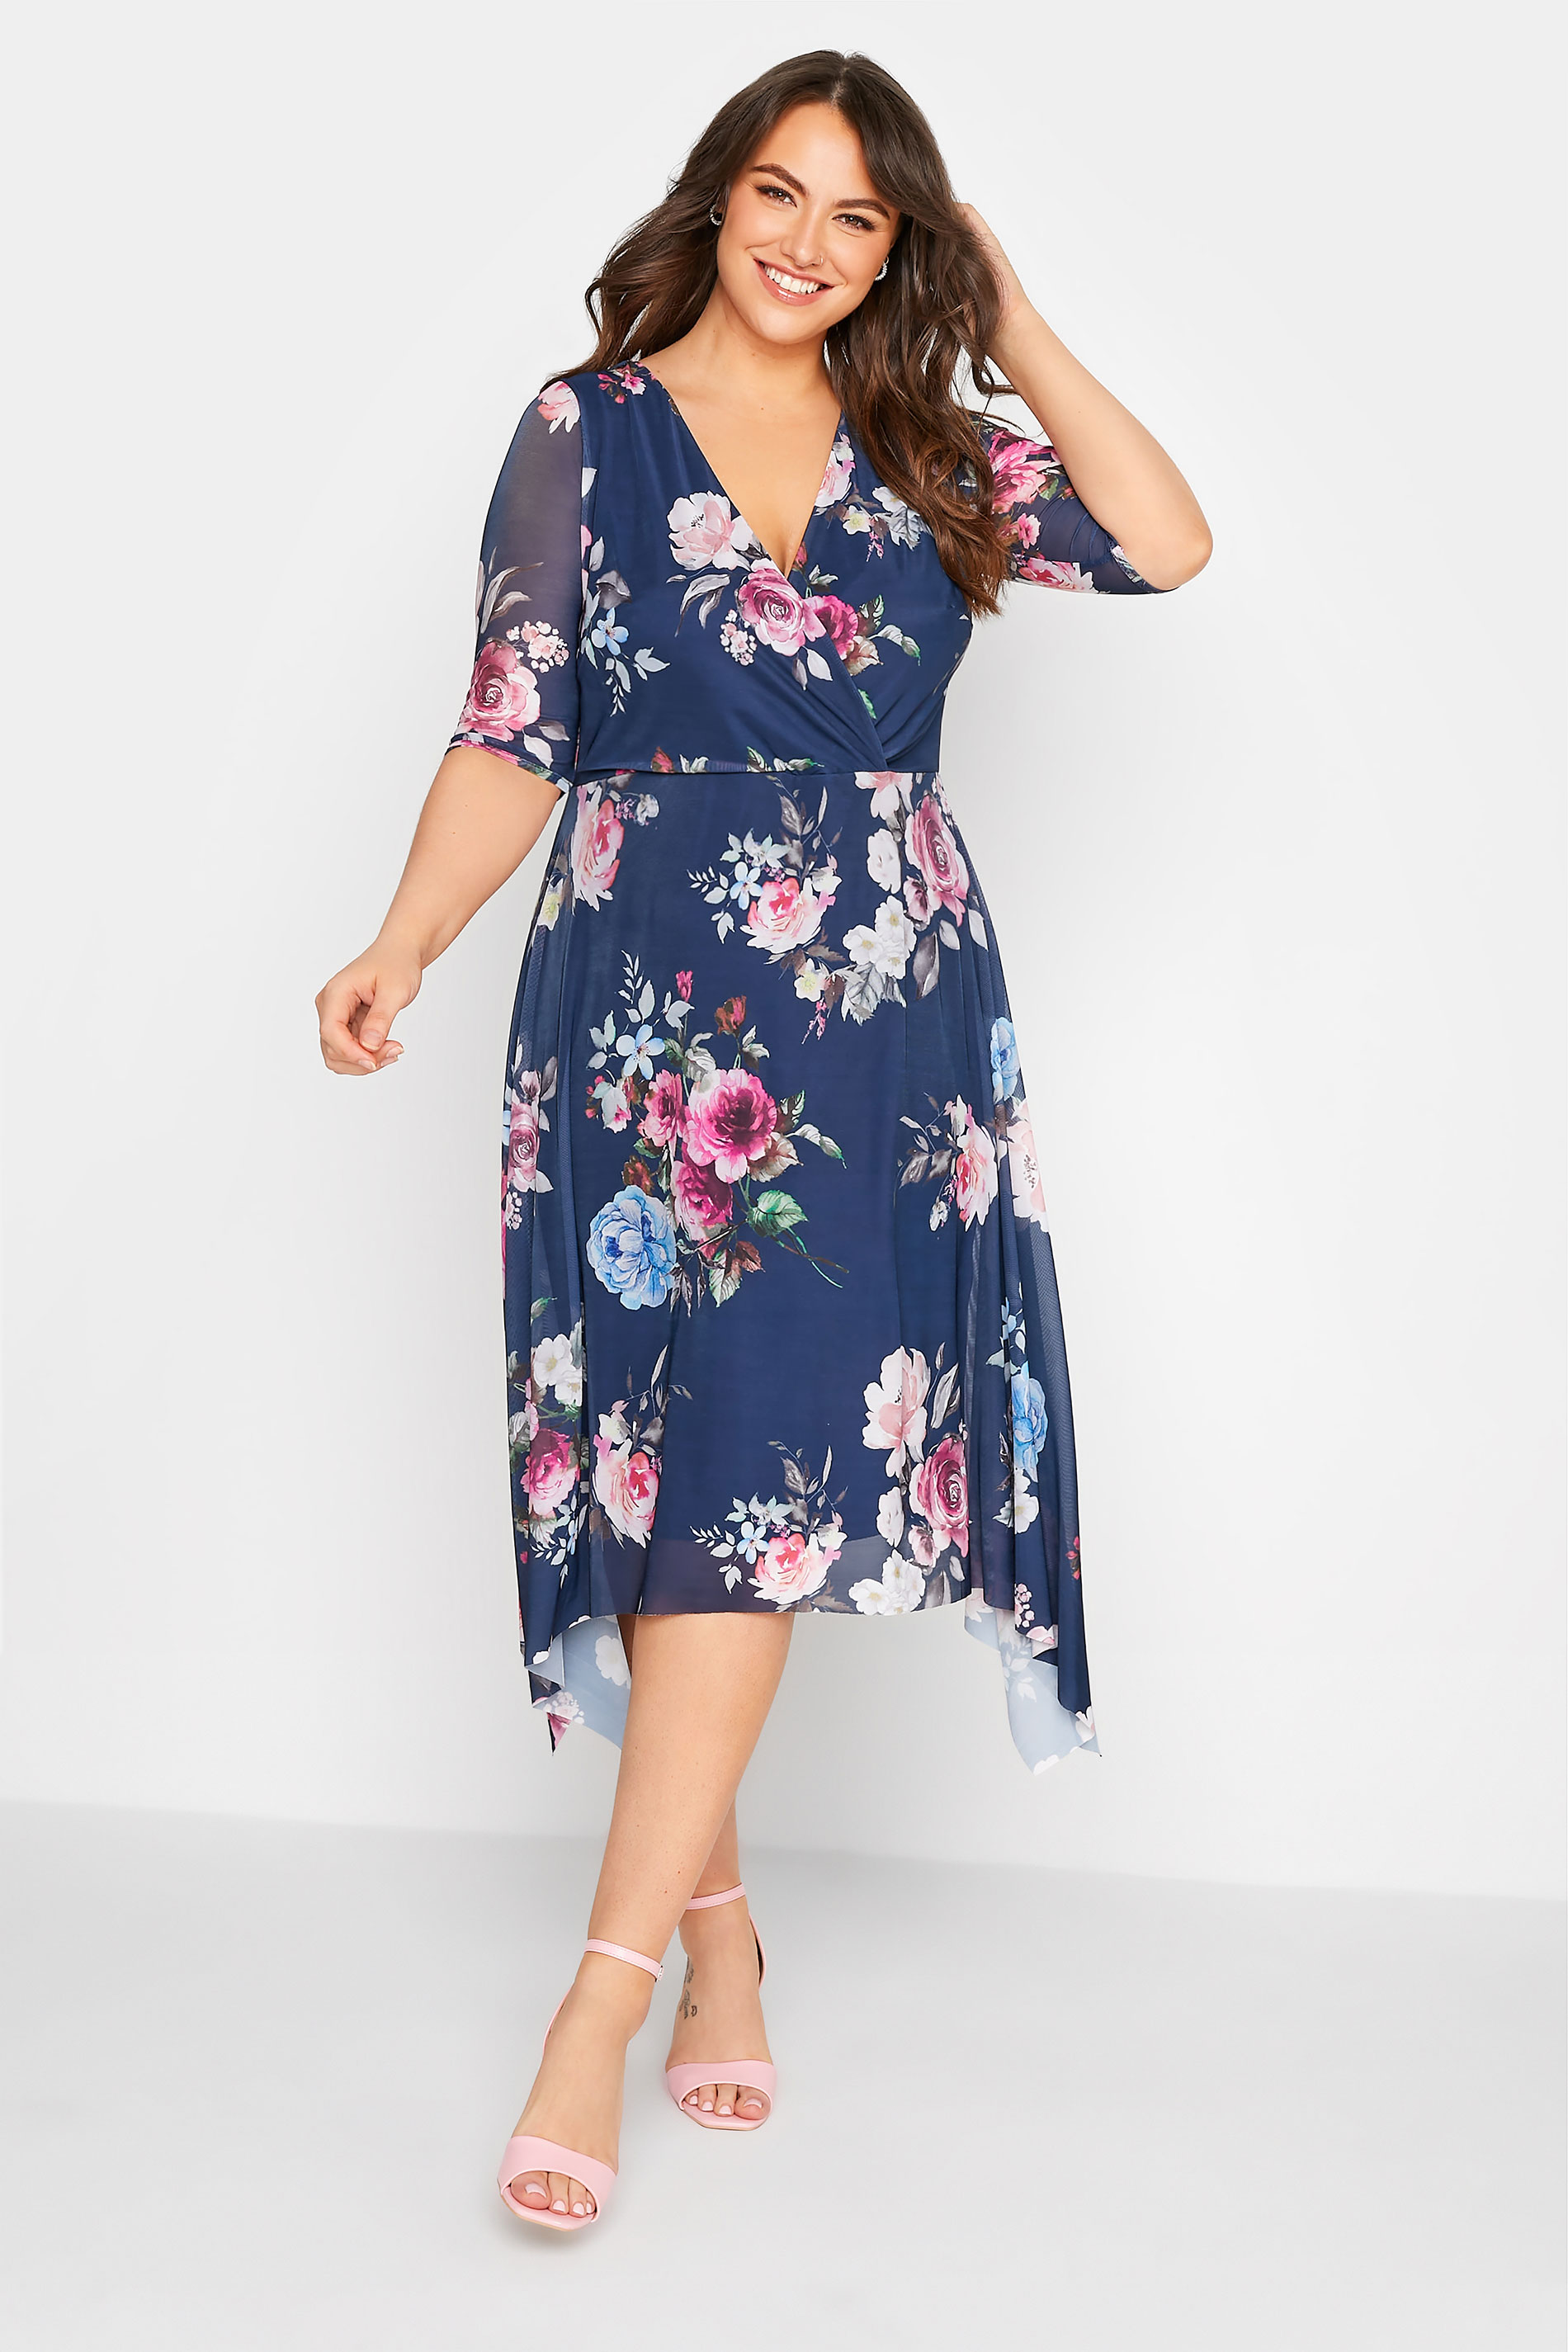 Robes Grande Taille Grande taille  Robes Portefeuilles | YOURS LONDON - Robe à Fleurs Bleue Marine Cache-Coeur - GZ90506